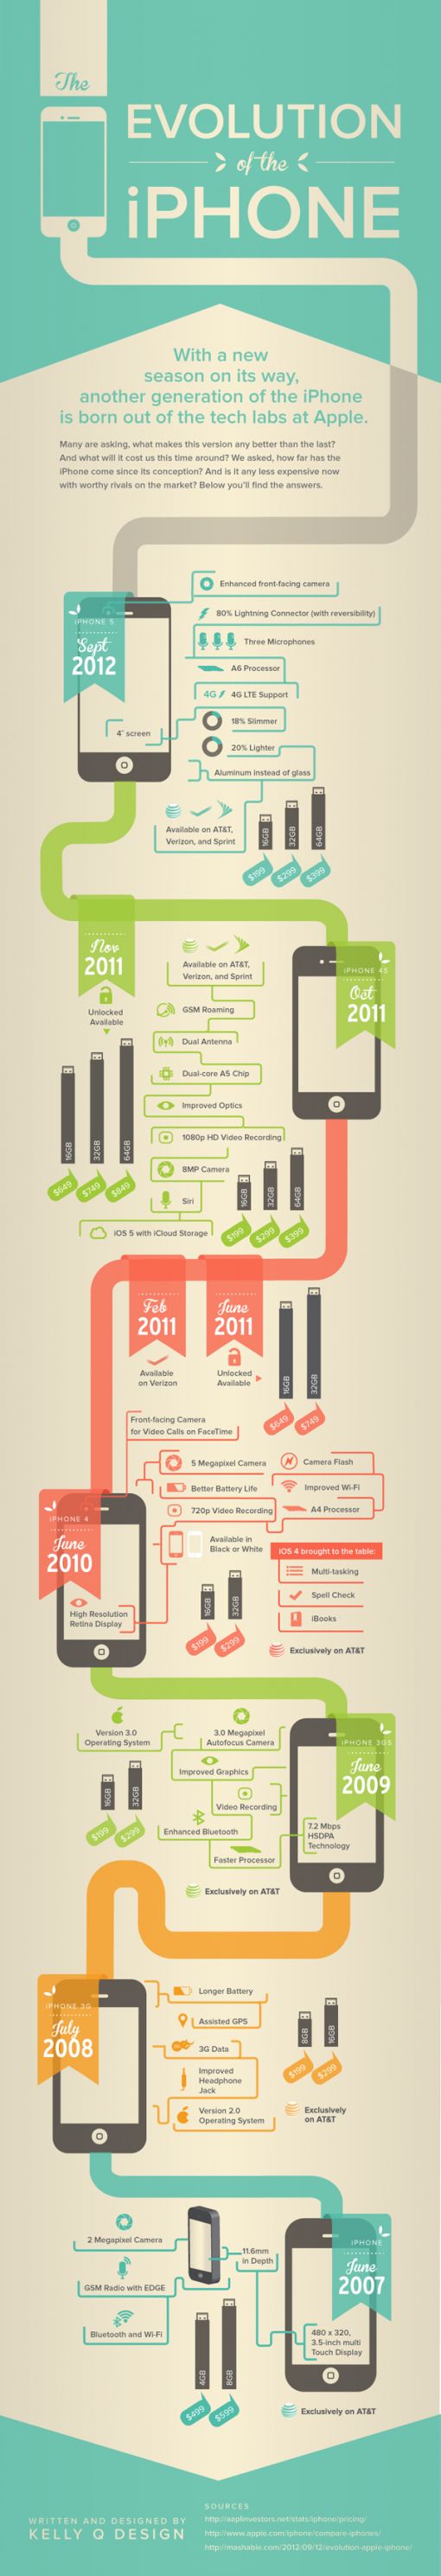 evolution-of-the-iphone-infographic.jpg